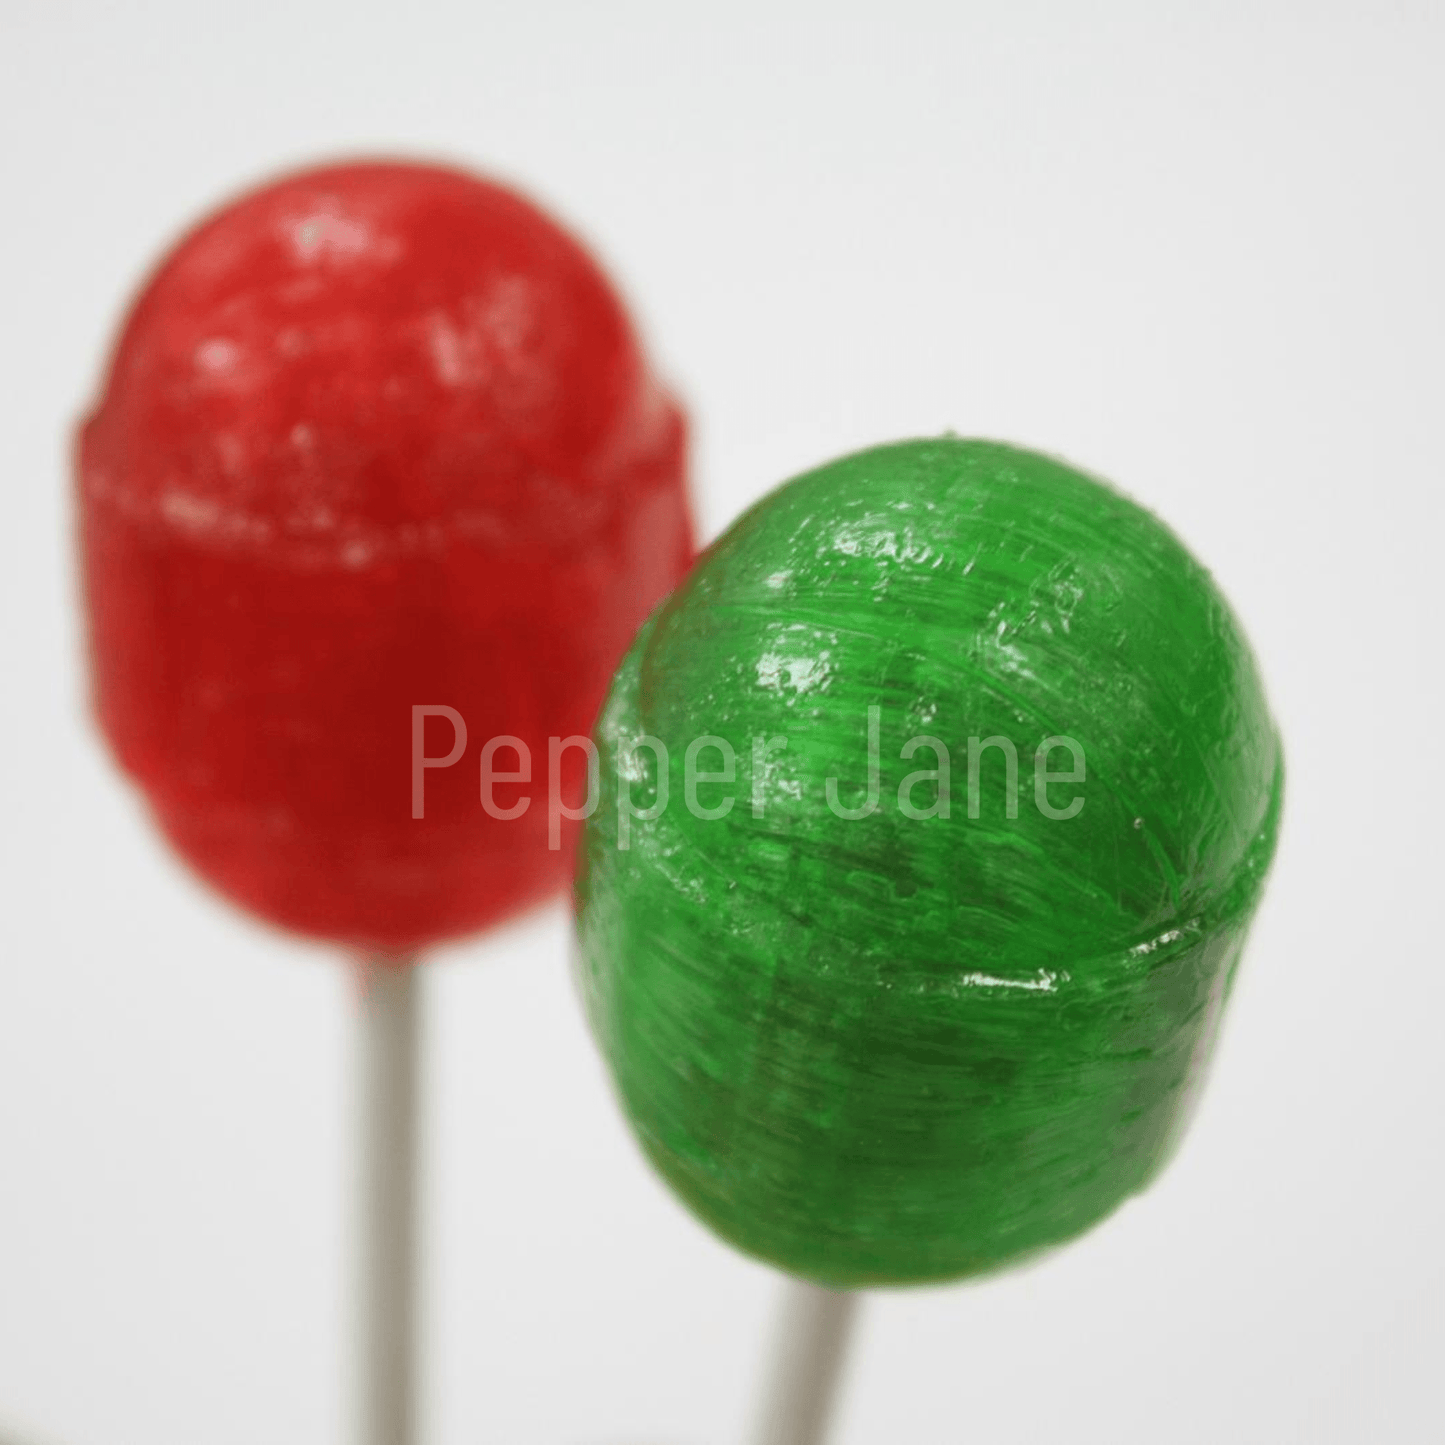 Lolly Bubble Pop Fragrance Oil (Blow Pops Type) - Pepper Jane's Colors and Scents